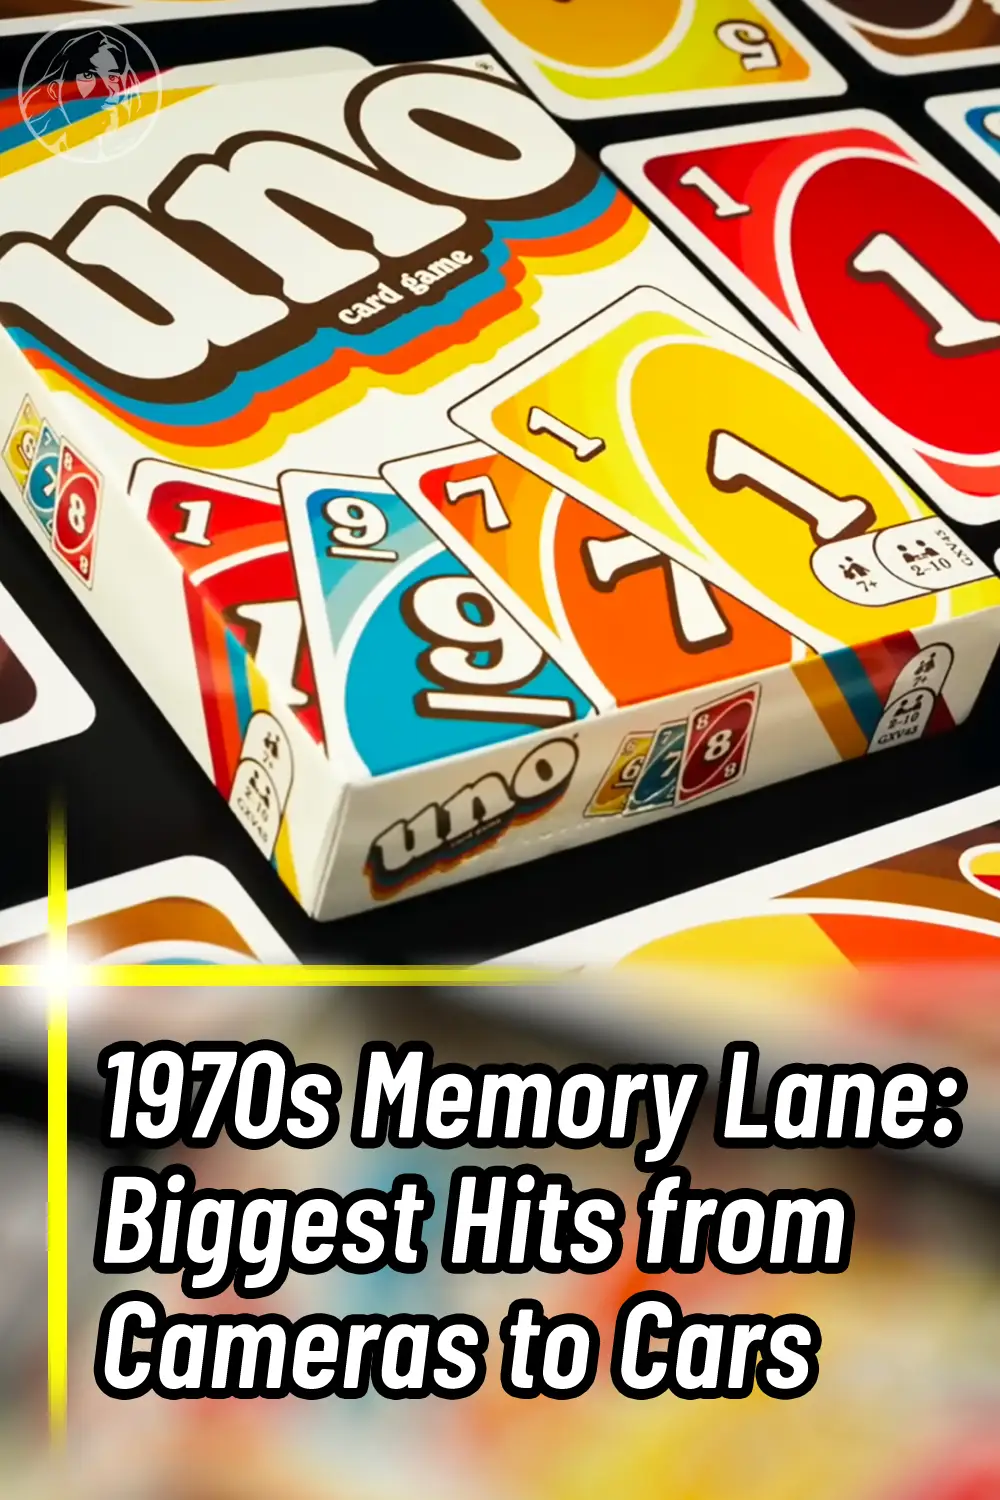 1970s Memory Lane: Biggest Hits from Cameras to Cars